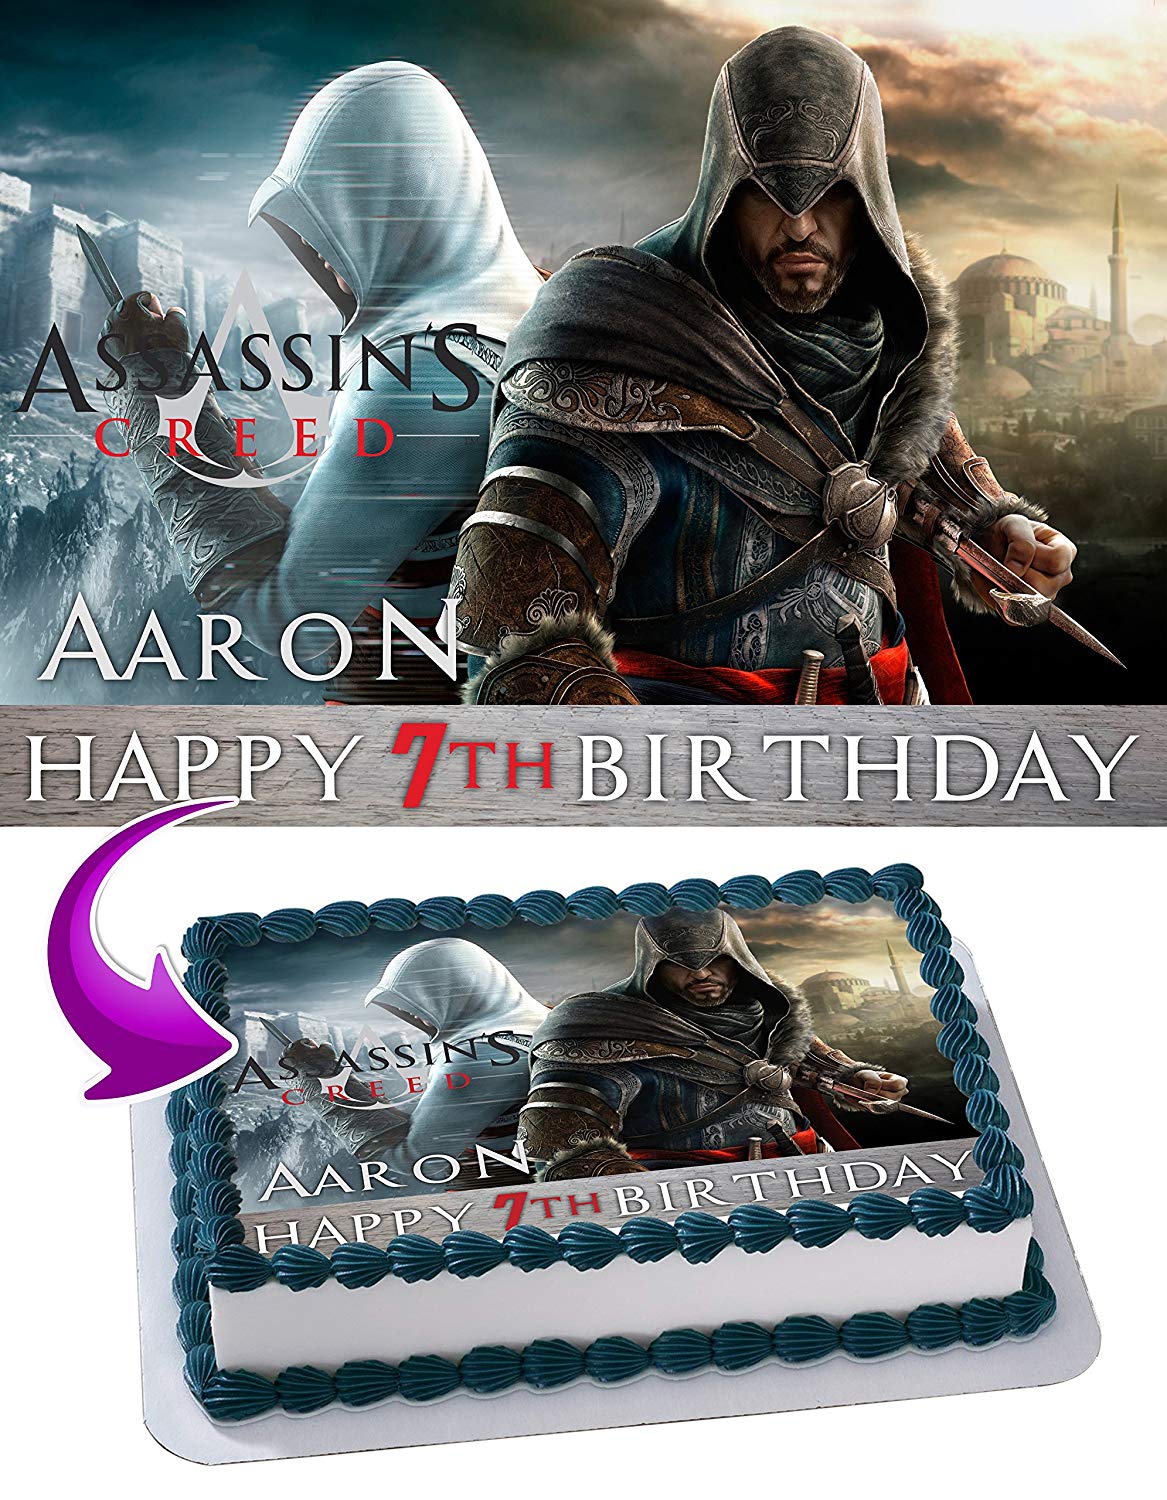 For A Young Man Who Turned 22 Assassins Creed 2 Is His Favorite Game To  Play Sponge With Raspberry Bavarois Filling Decoration Is All -  CakeCentral.com